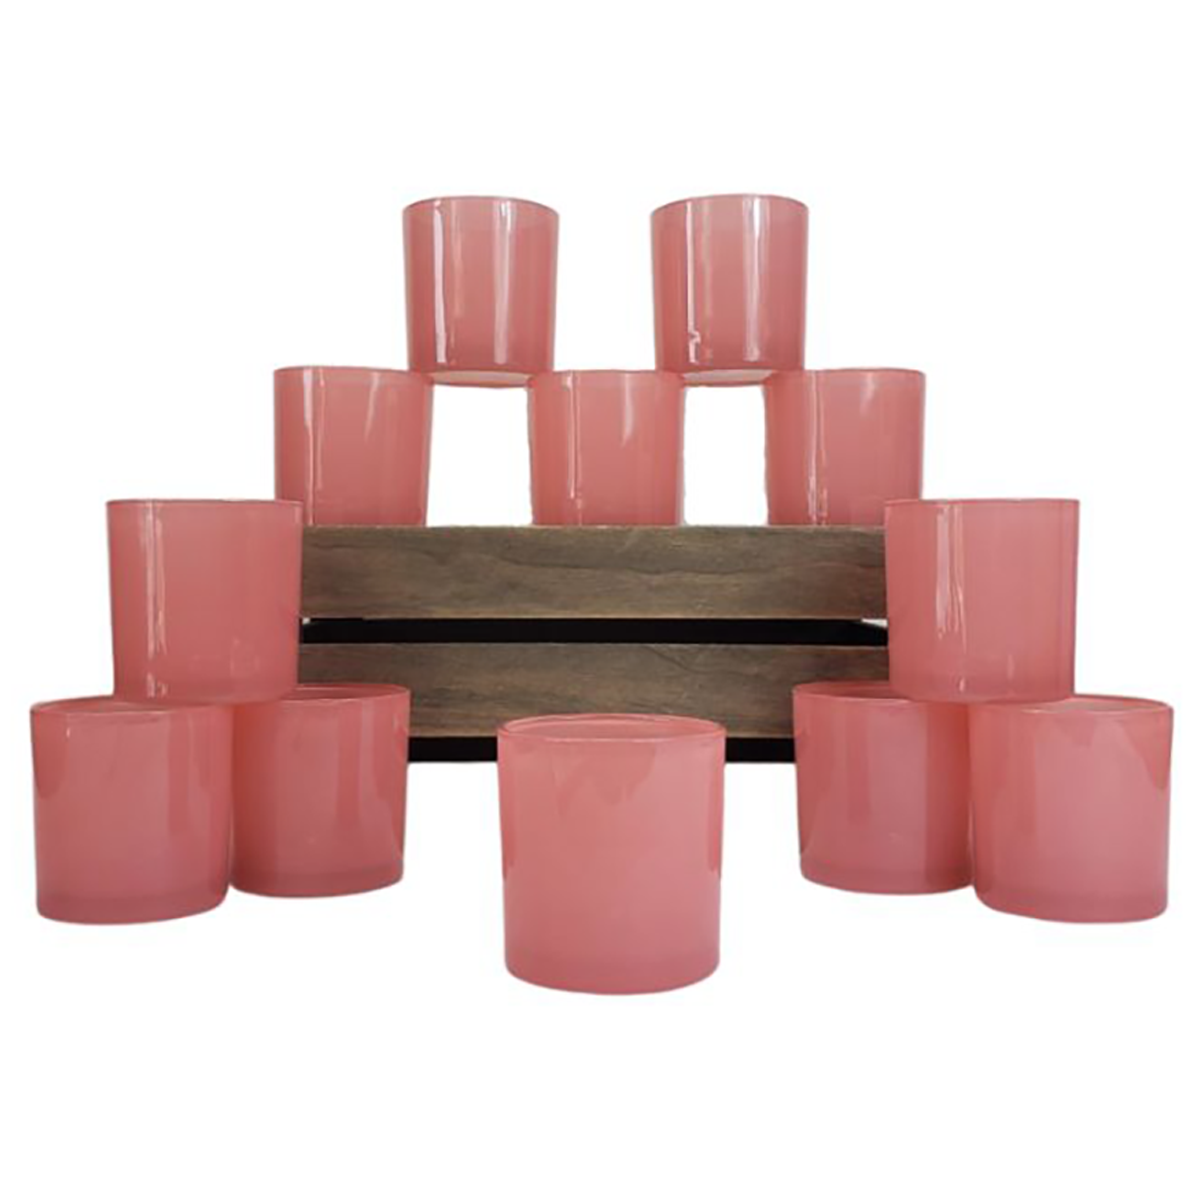 Monticiano candle vessels Ballerina Pink Group